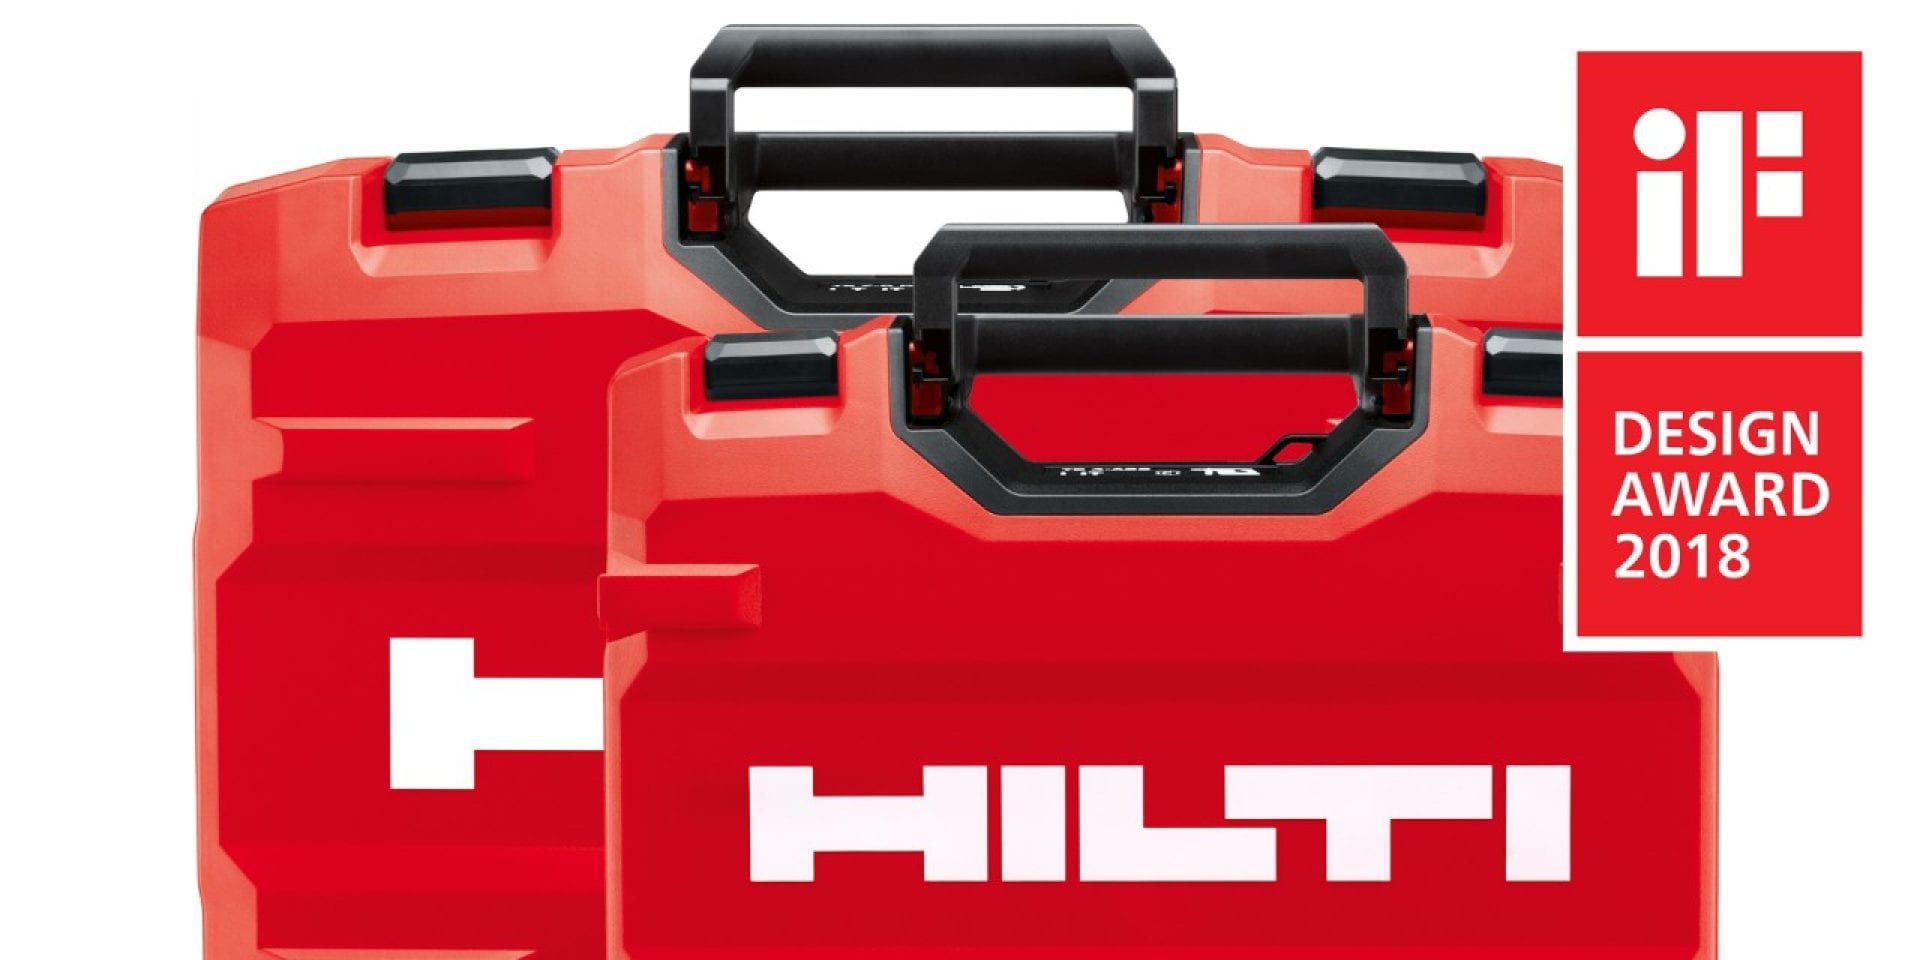 HILTI INNOVATIONS COLLECT IF DESIGN AWARDS